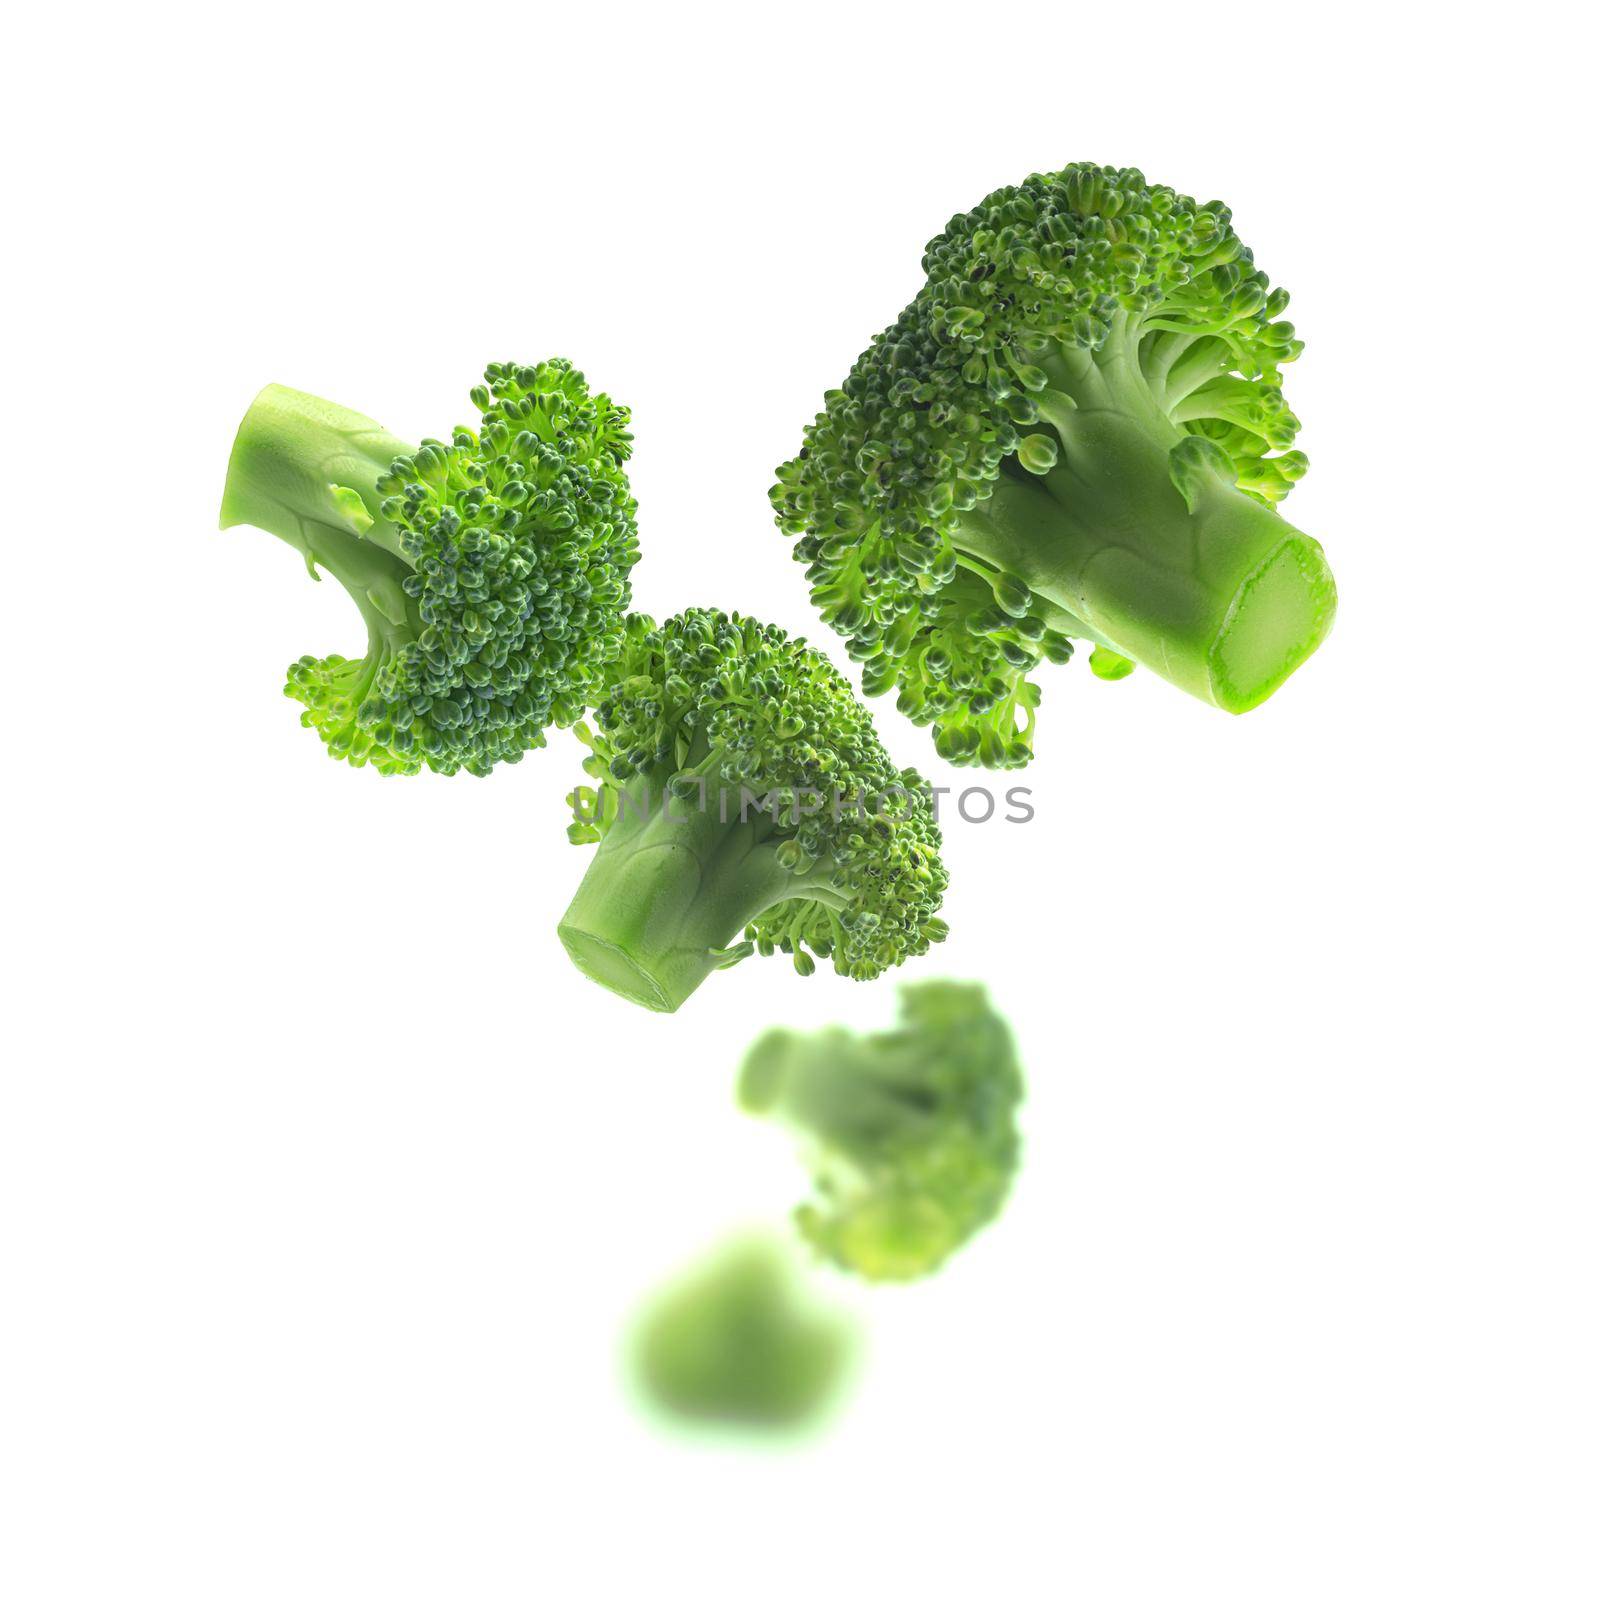 Green broccoli levitating on a white background.